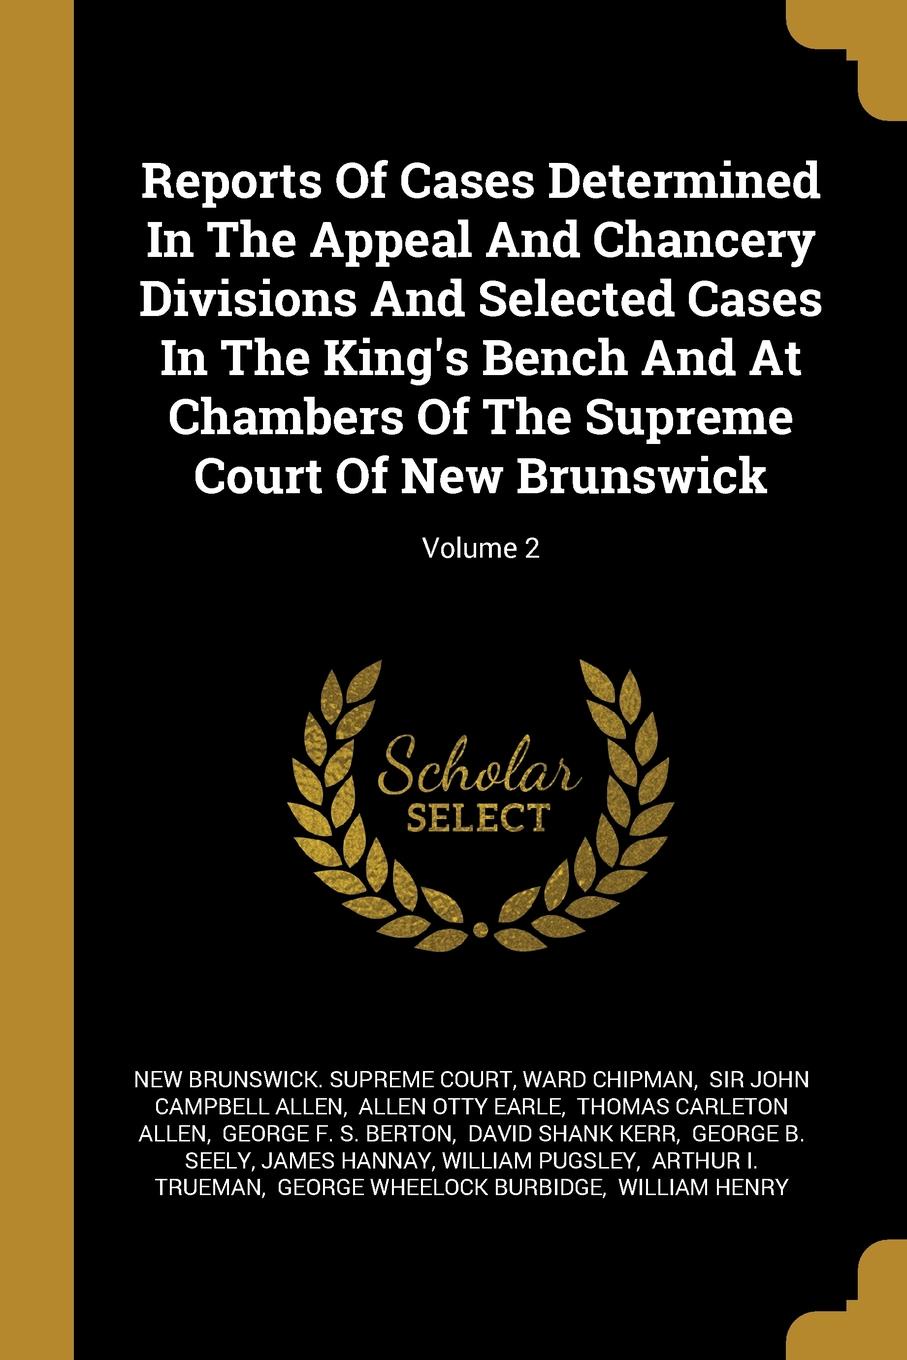 Reports Of Cases Determined In The Appeal And Chancery Divisions And Selected Cases In The King.s Bench And At Chambers Of The Supreme Court Of New Brunswick; Volume 2